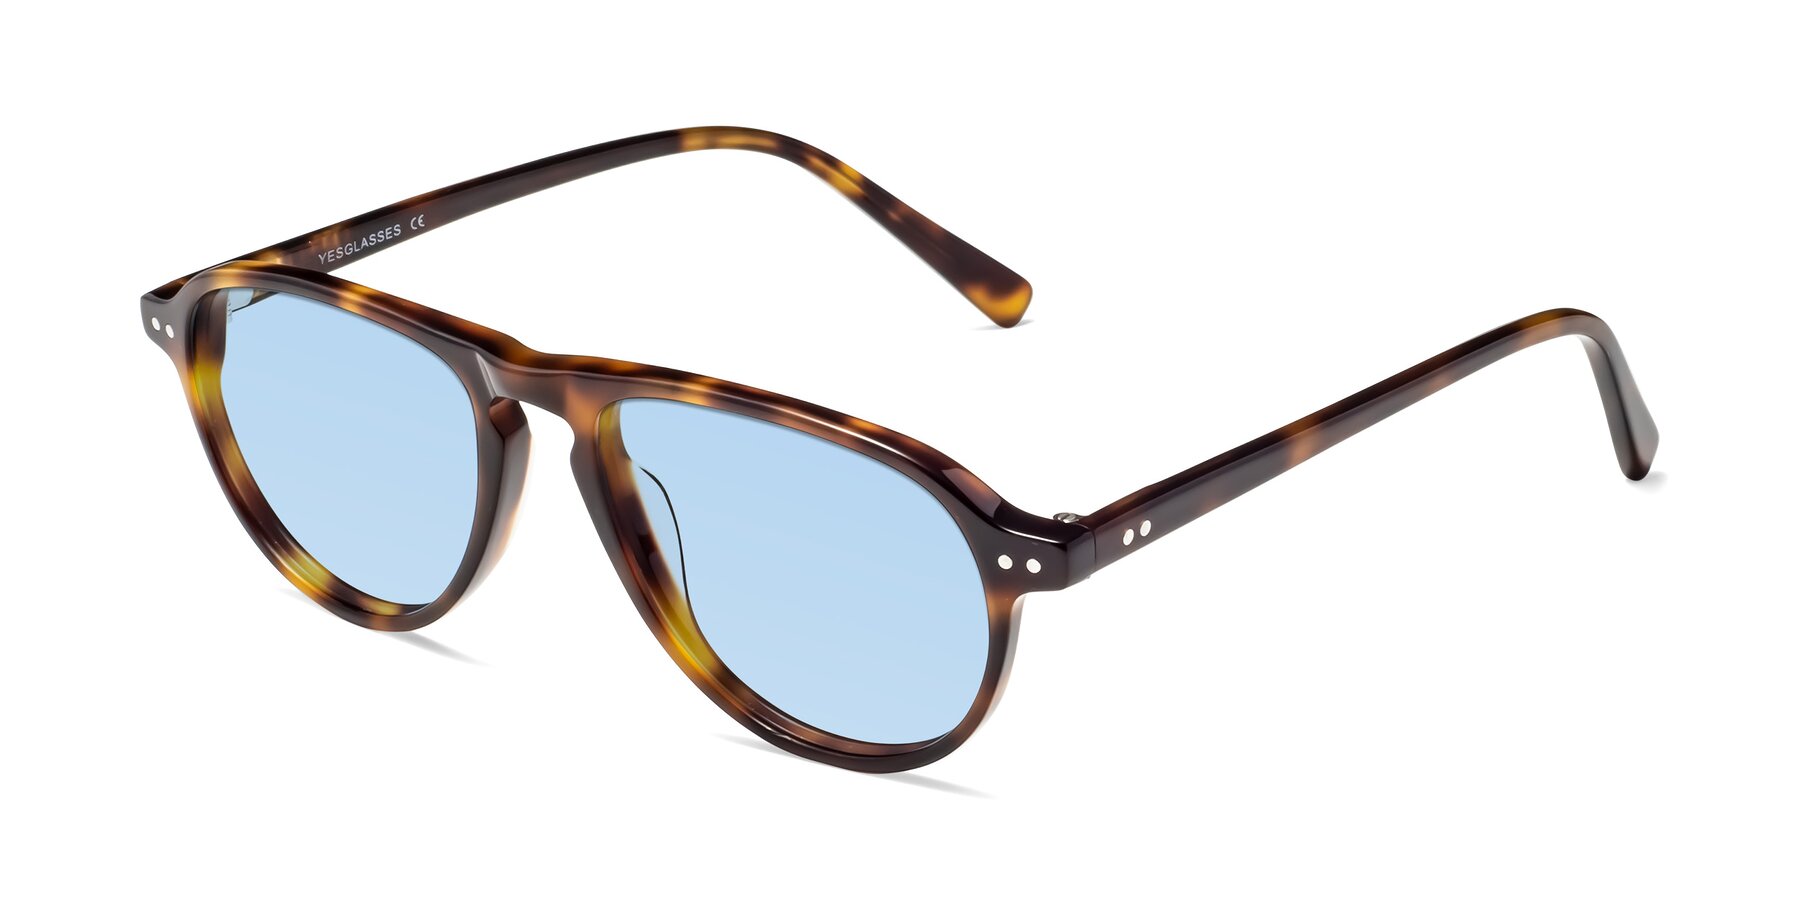 Angle of 17544 in Tortoise with Light Blue Tinted Lenses